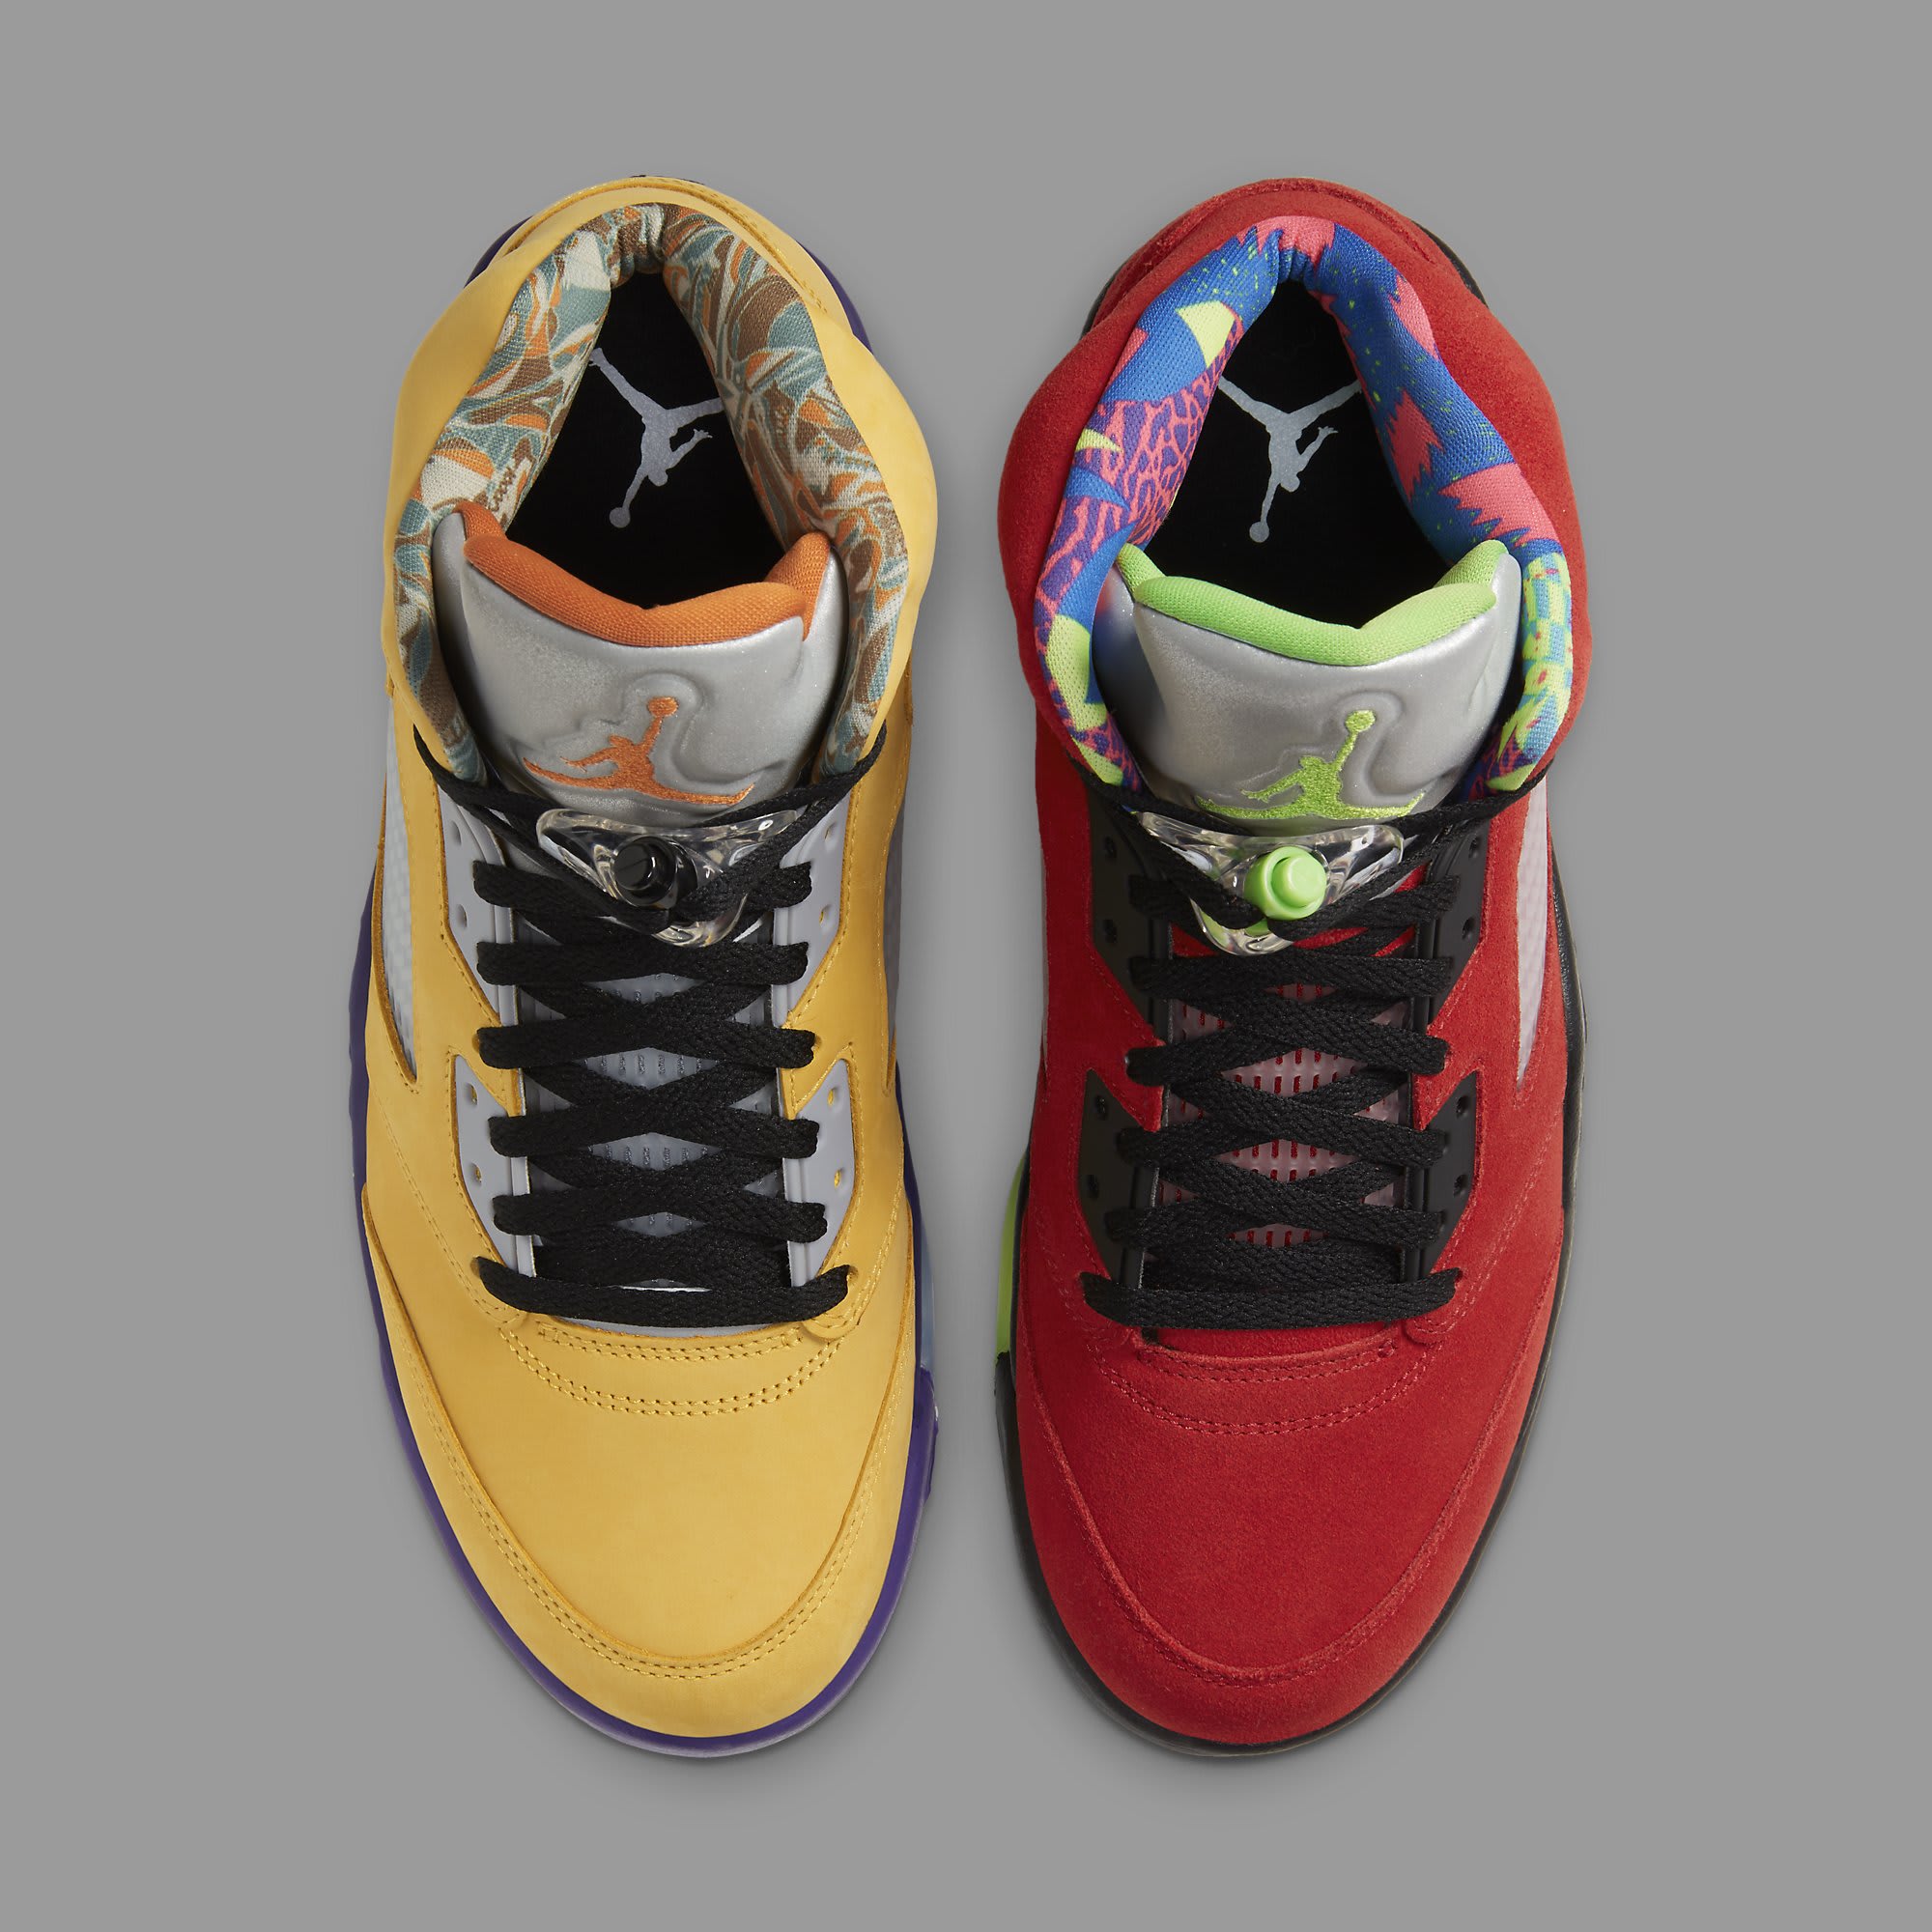 when did the air jordan 5 come out